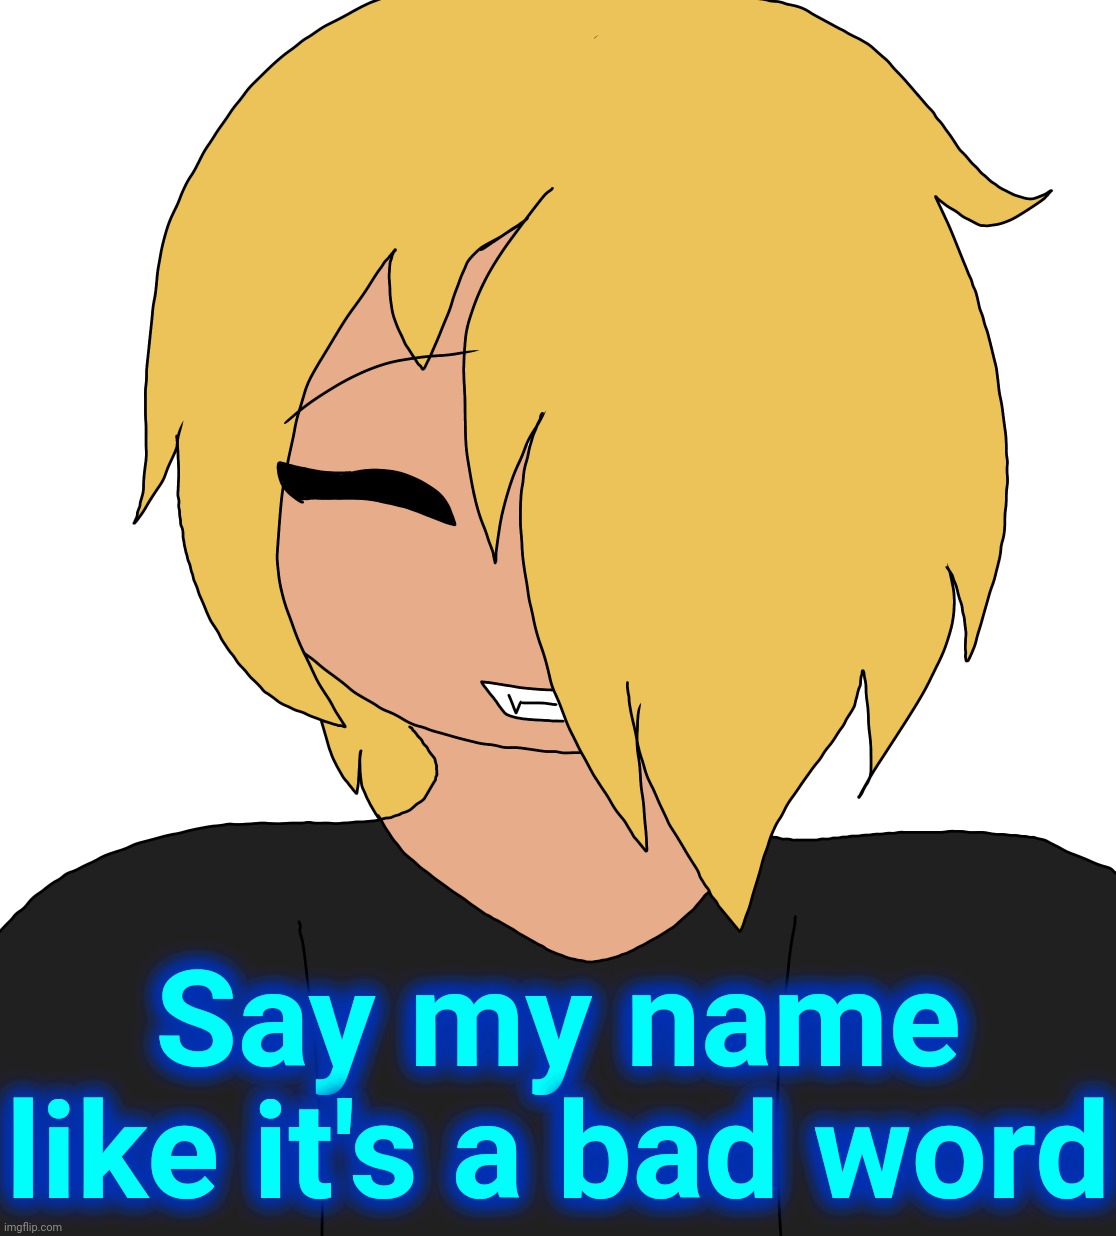 Spire smiling | Say my name like it's a bad word | image tagged in spire smiling | made w/ Imgflip meme maker